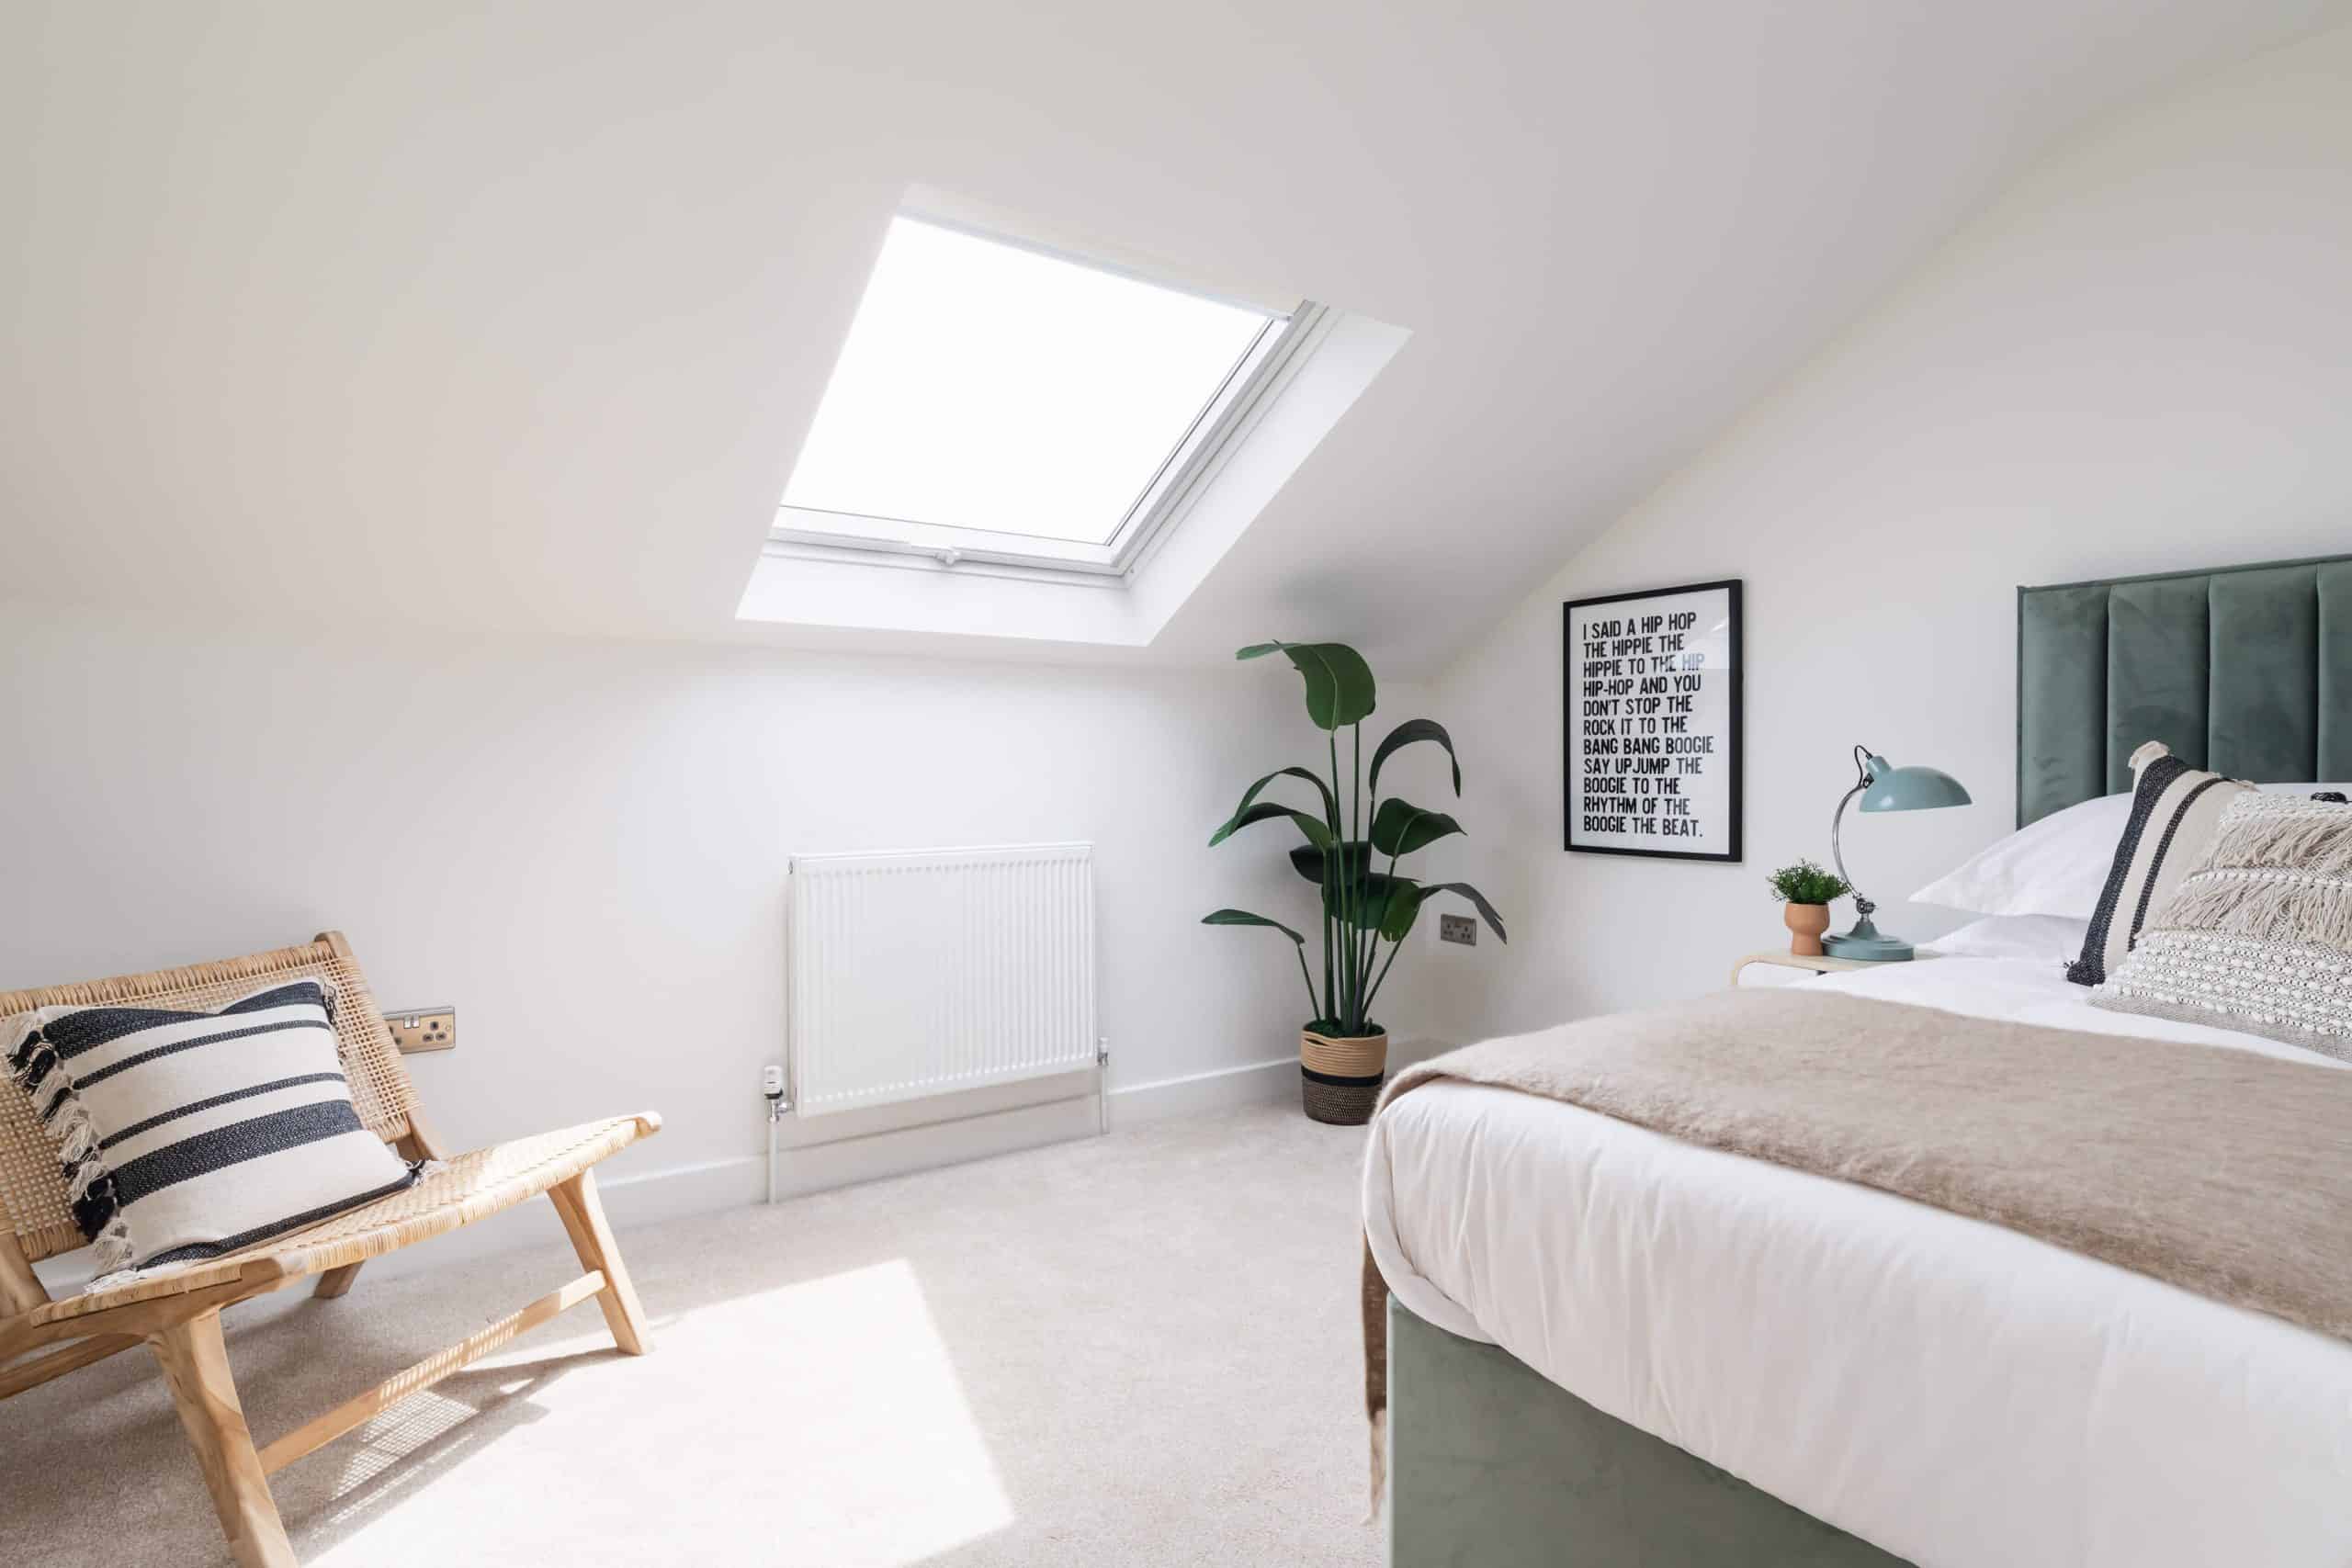 Bedroom 3: single bed of muted green accentuated with corner house plant and bedside lamp of same colour. Striped cushion and textured seating brings coastal feeling to the Dorset Airbnb